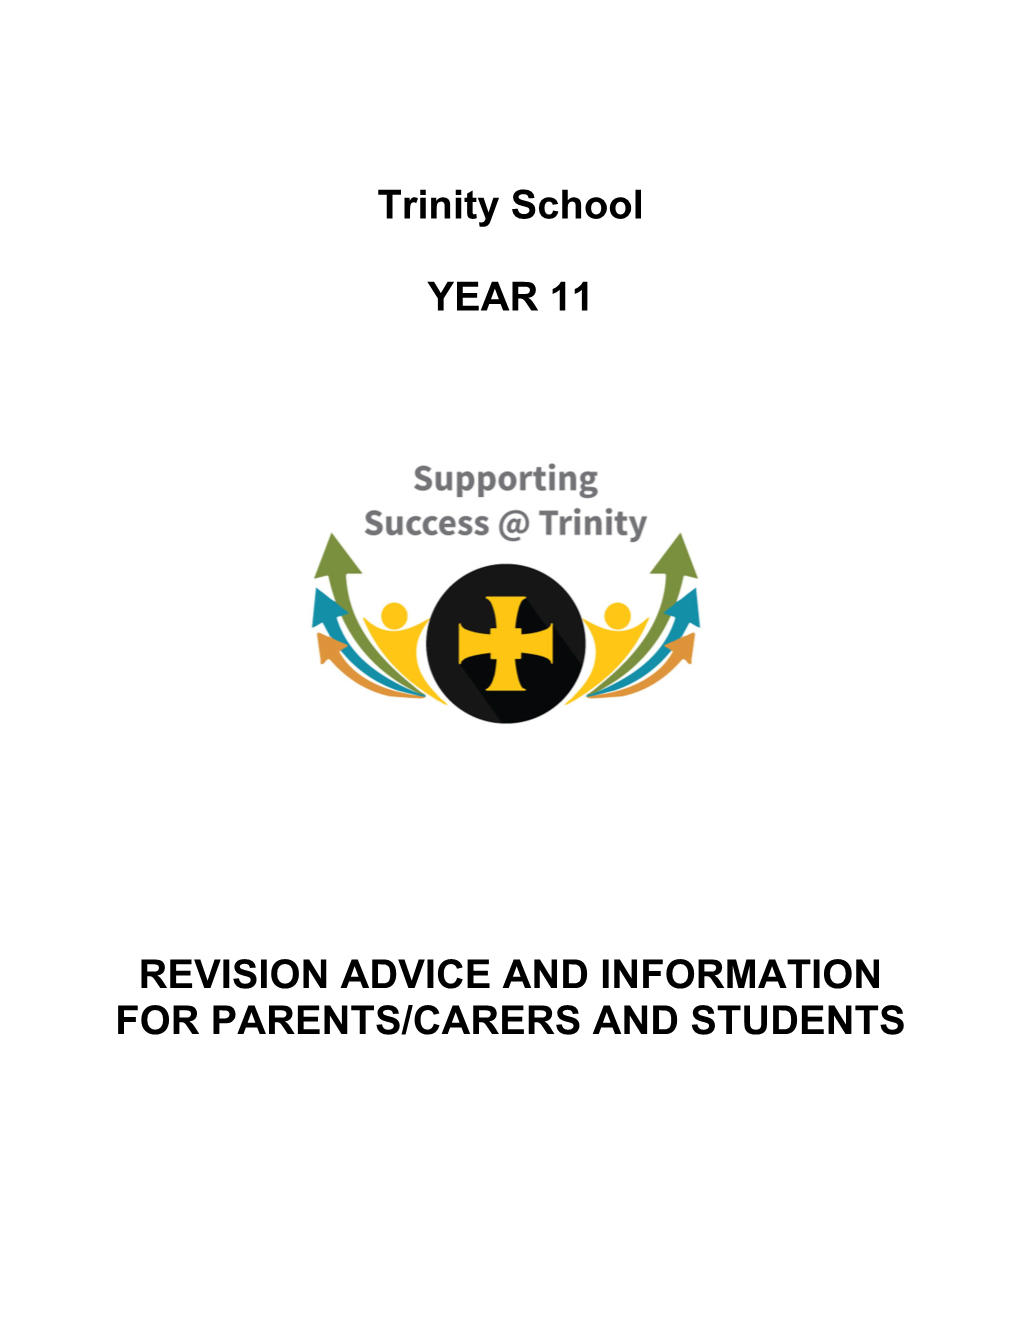 Revision Advice and Information for Parents/Carers and Students